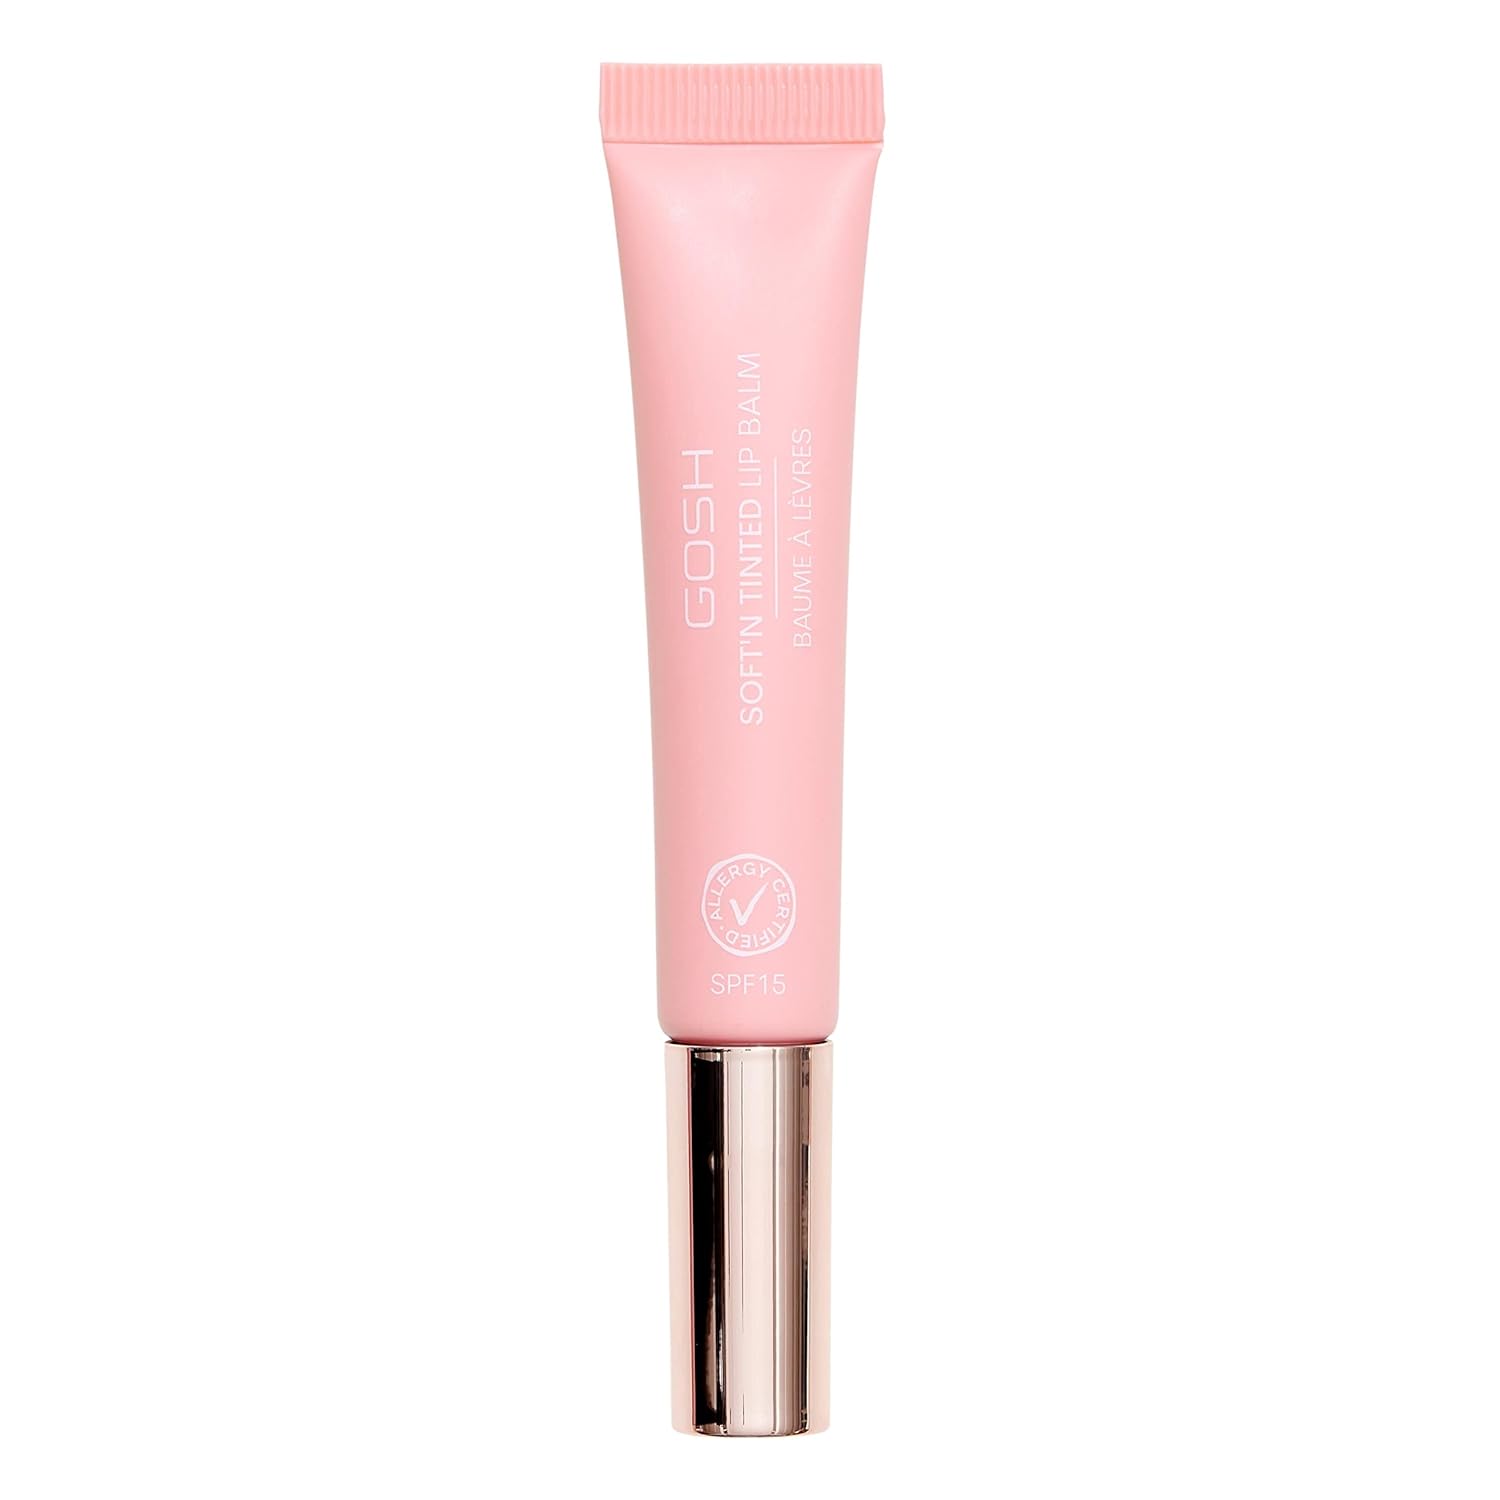 GOSH Tinted Lip Balm with SPF 15 I Vegan Lip Care Pen with Colour in Rose (003) I Smooth Soft Lips without Gluing I Fragrance-Free Glossy Booster I Moisturising Lip Balm